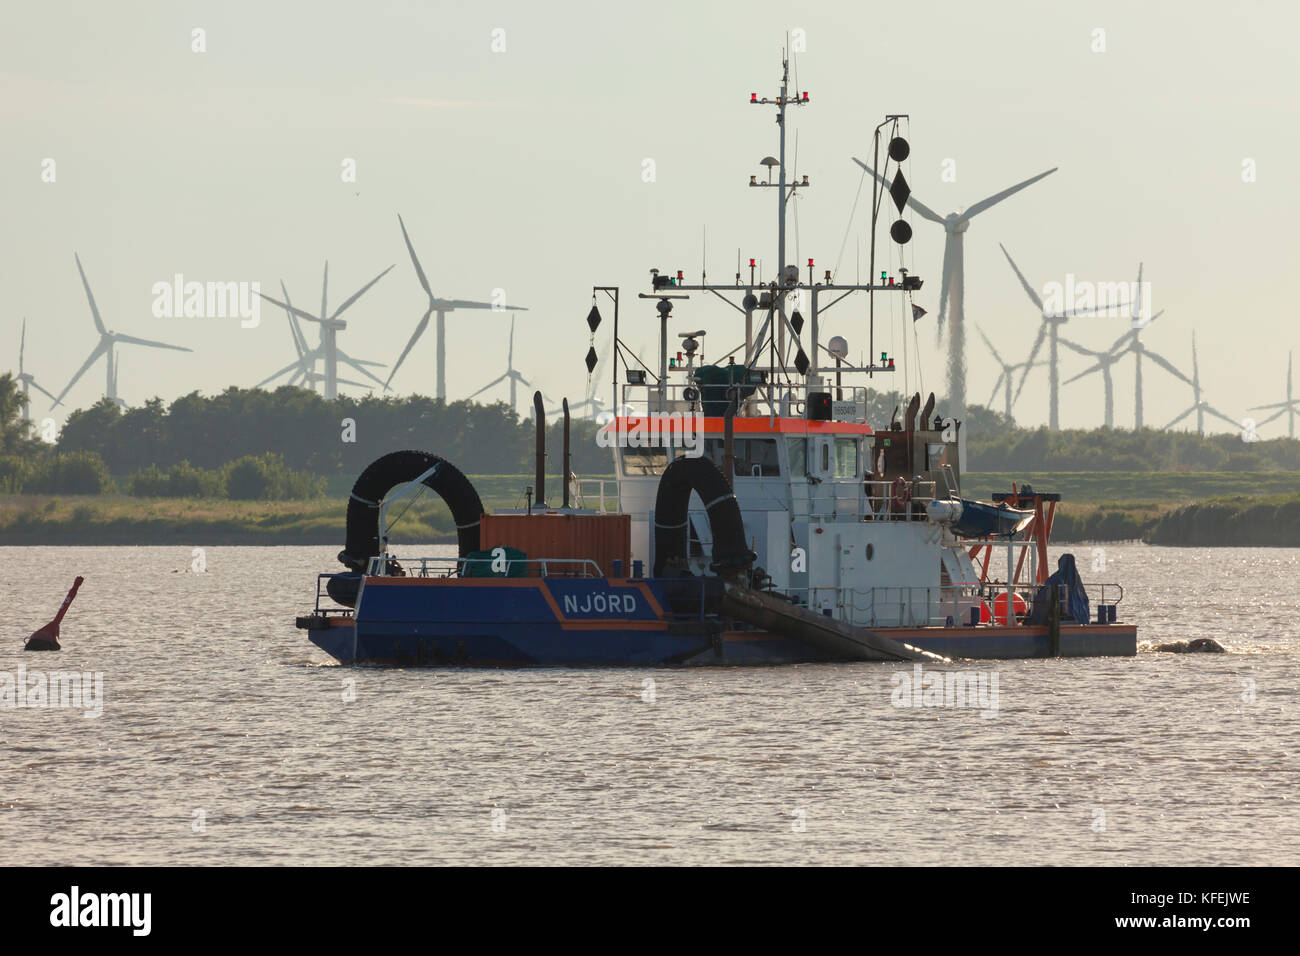 Dredger „Njörd“ on Elbe river, wind turbines in background Stock Photo